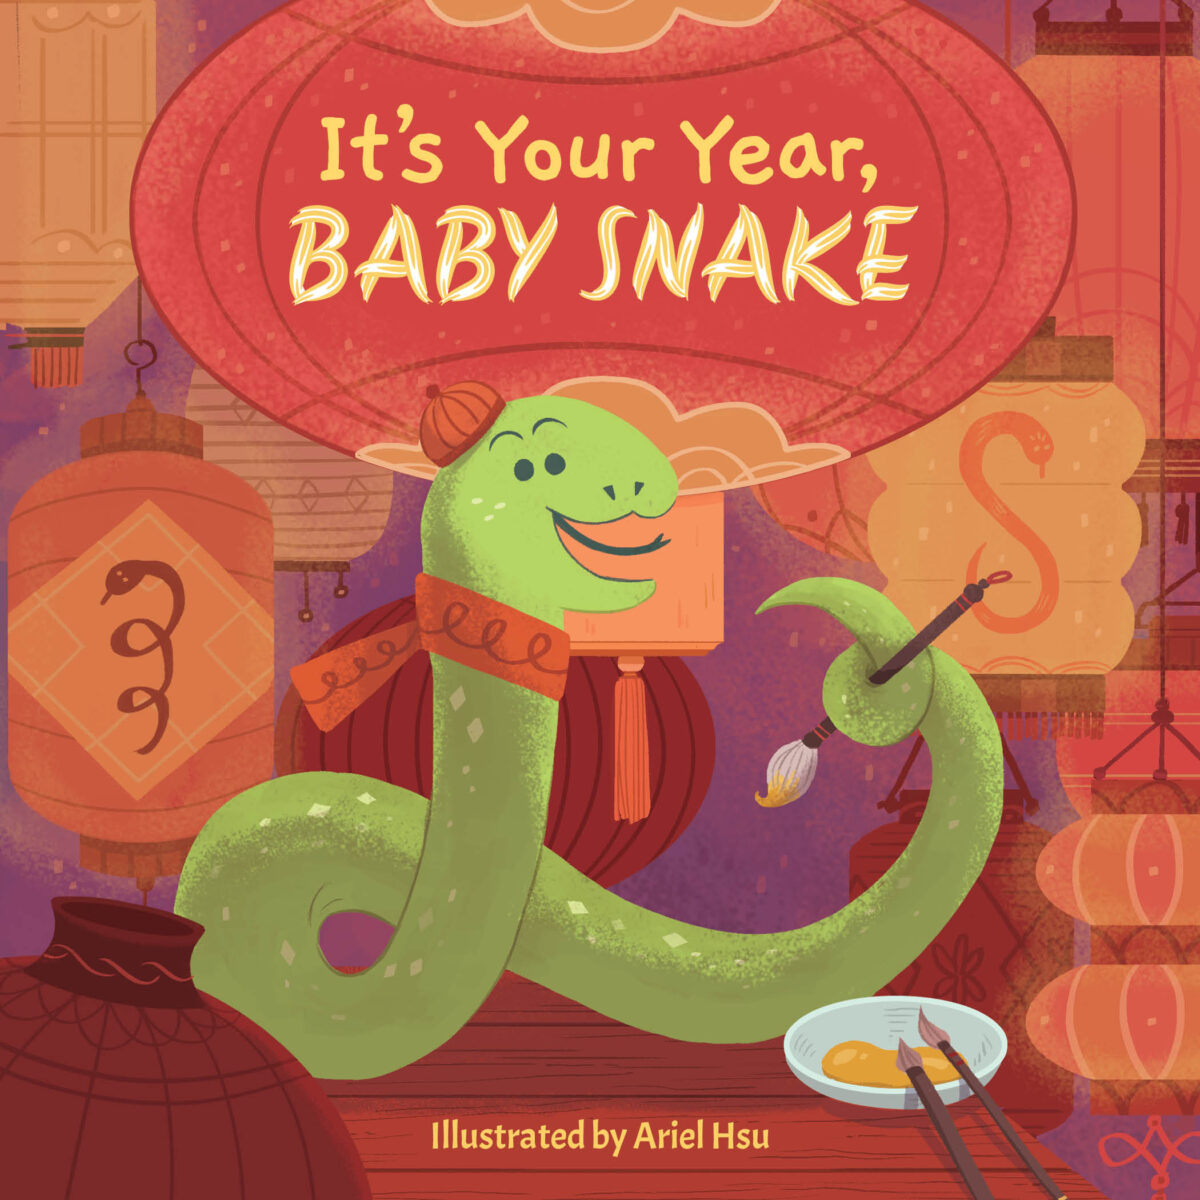 It’s Your Year Baby Snake